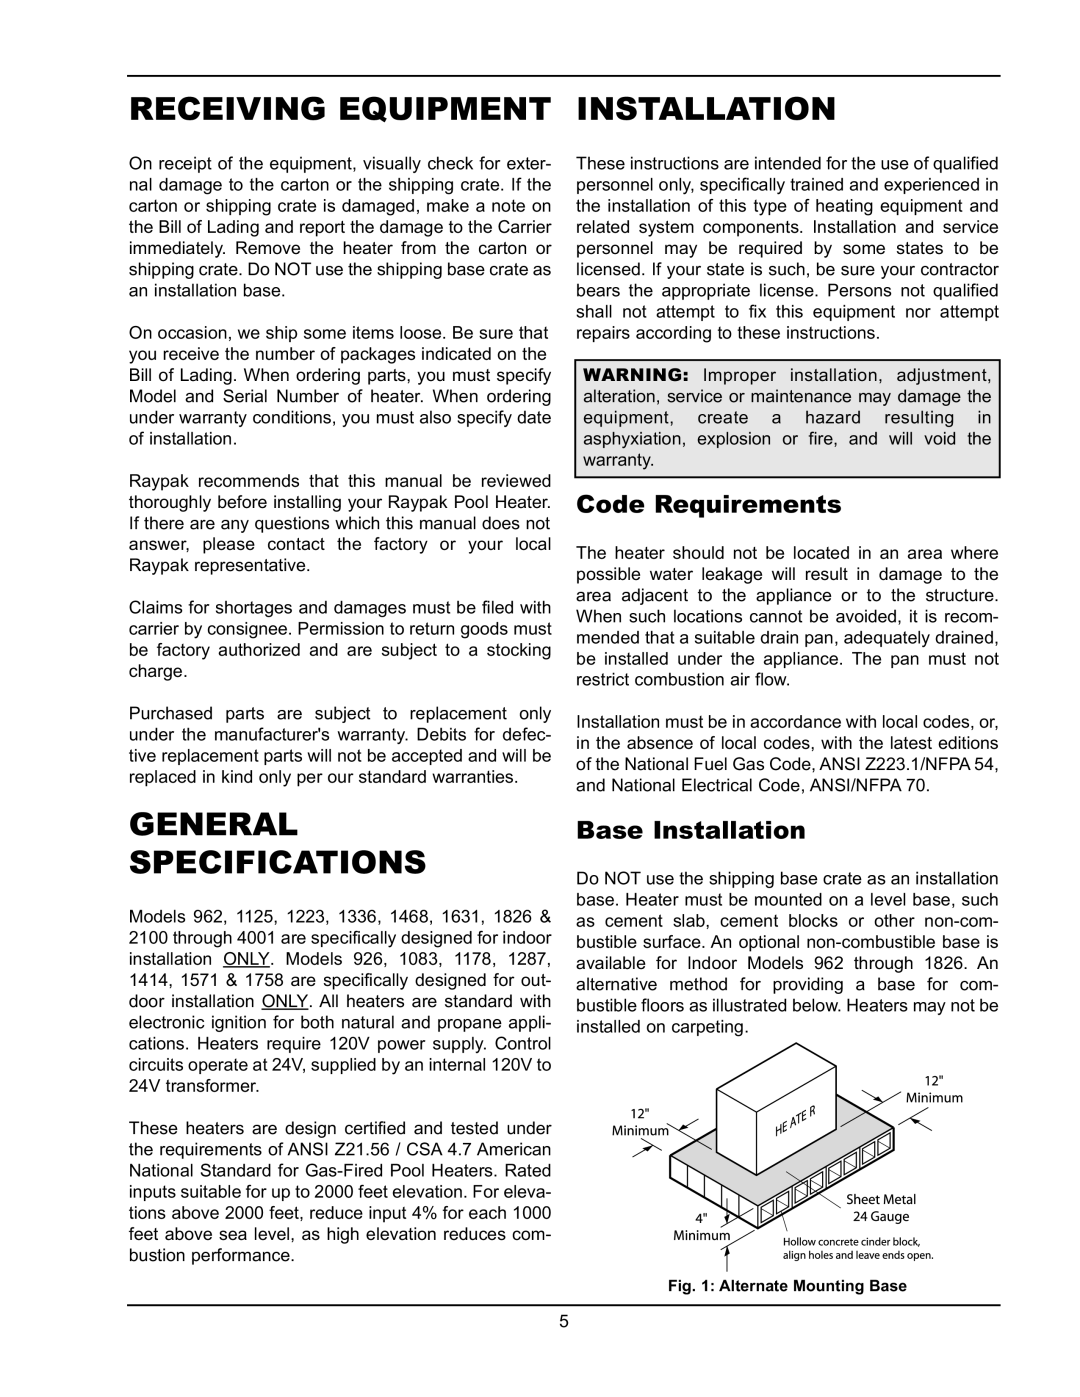 Raypak P-4001, P-1826, P-926 Receiving Equipment Installation, General Specifications, Code Requirements, Base Installation 